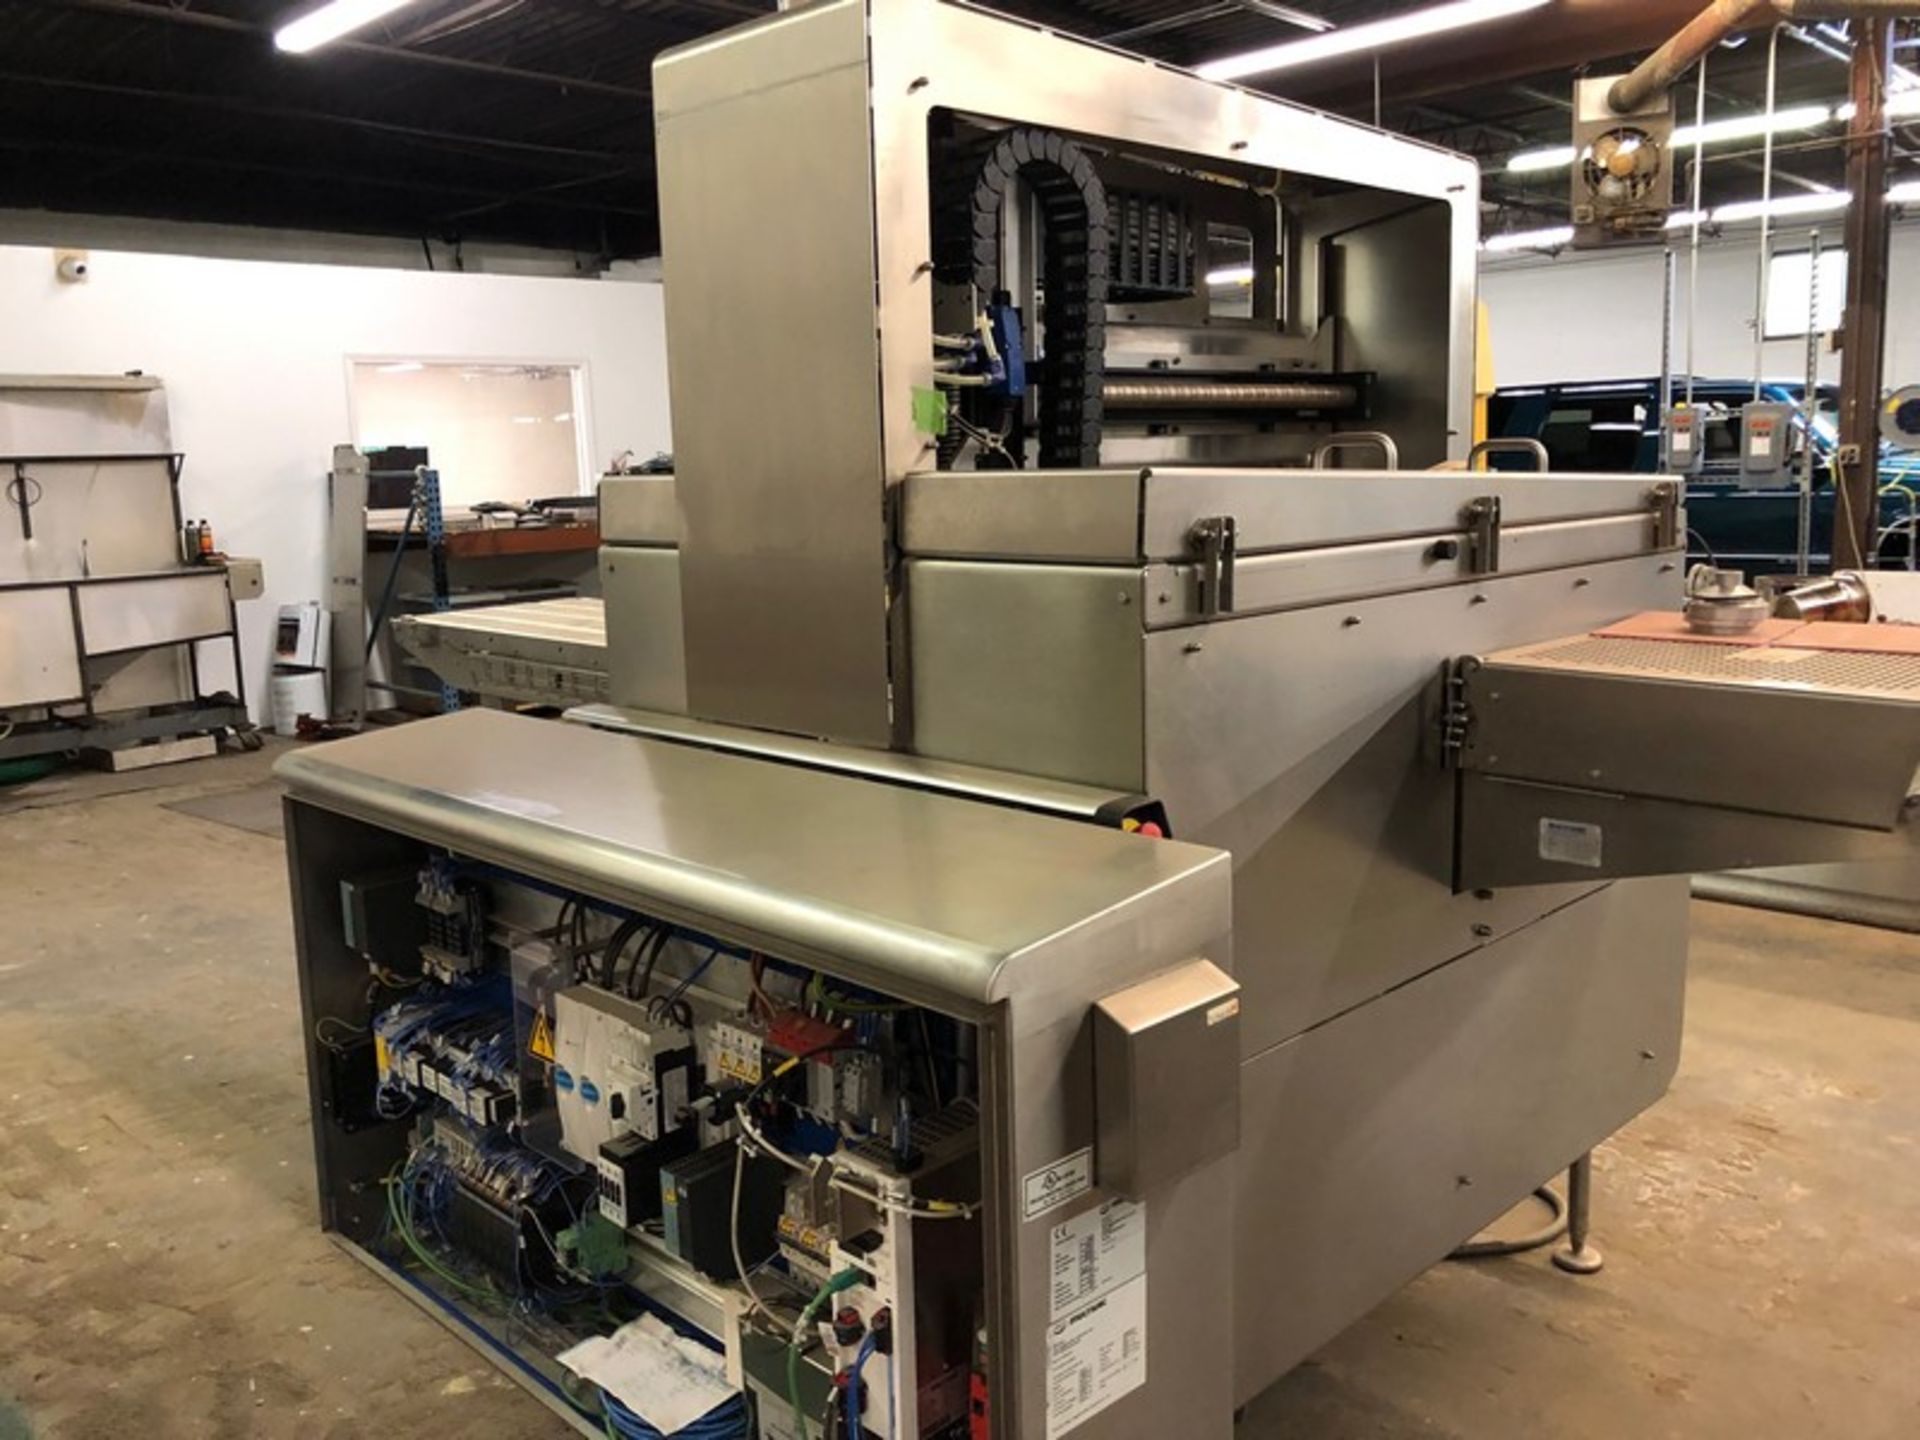 2012 MultiVac Vacuum Packager, M/N H050, S/N 158613, 208 Volts, 1 Phase (LOCATED IN BELTSVILLE, MD) - Image 9 of 10